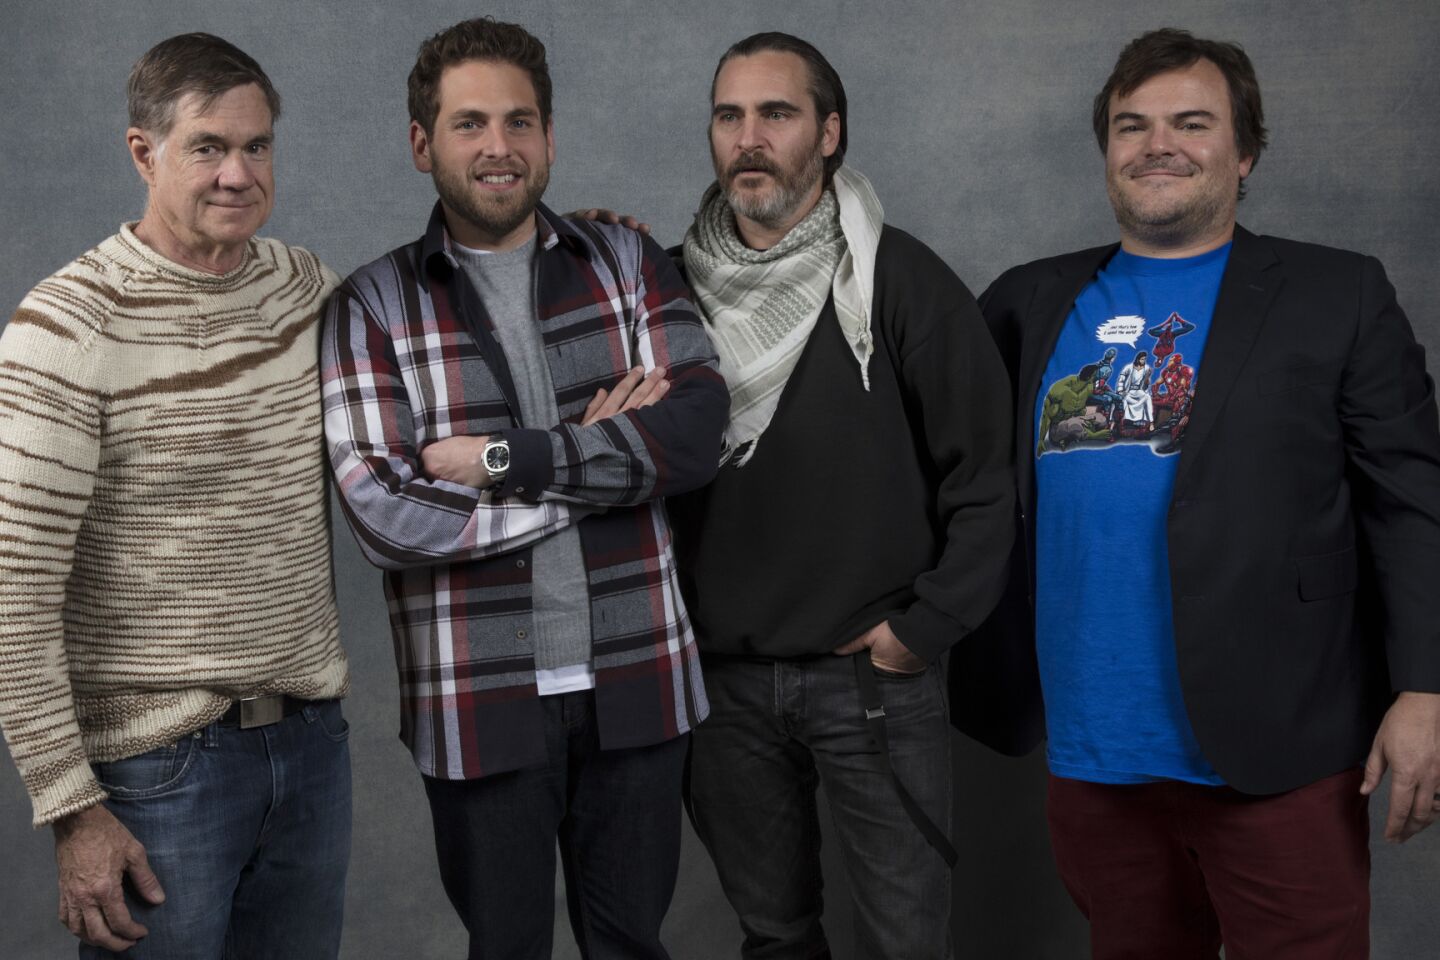 Director Gus Van Sant, Jonah Hill, Joaquin Phoenix and Jack Black from the film "Don't Worry, He Won't Get Far on Foot," photographed in the L.A. Times studio in Park City, Utah. FULL COVERAGE: Sundance Film Festival 2018 »